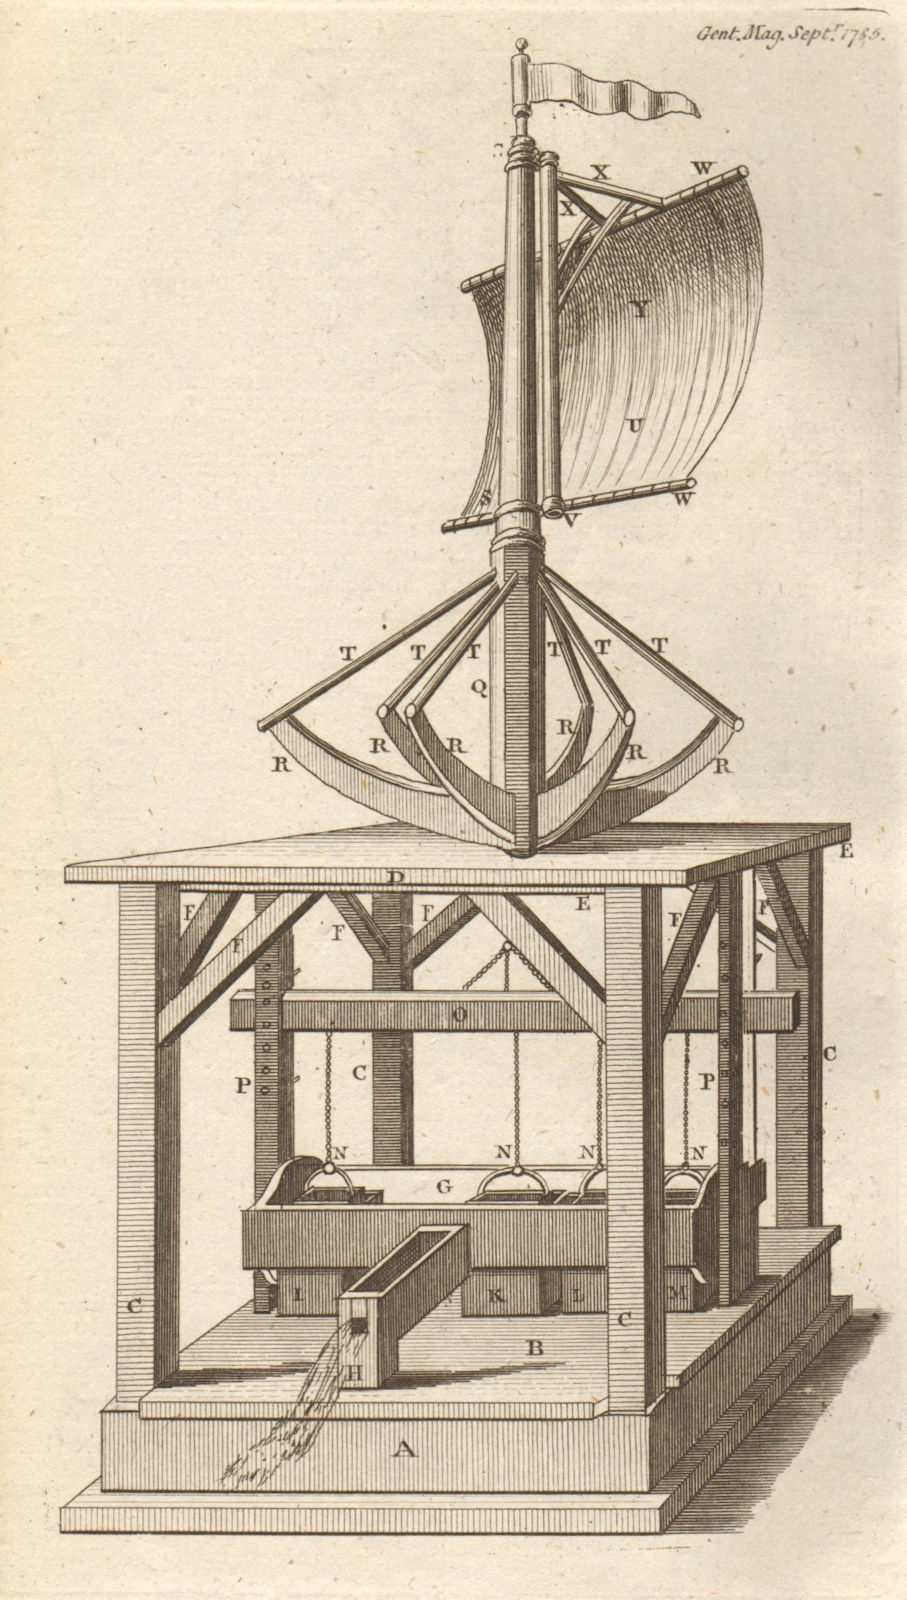 Associate Product A machine for raising water by means of a windsail by Merriman. Engineering 1785